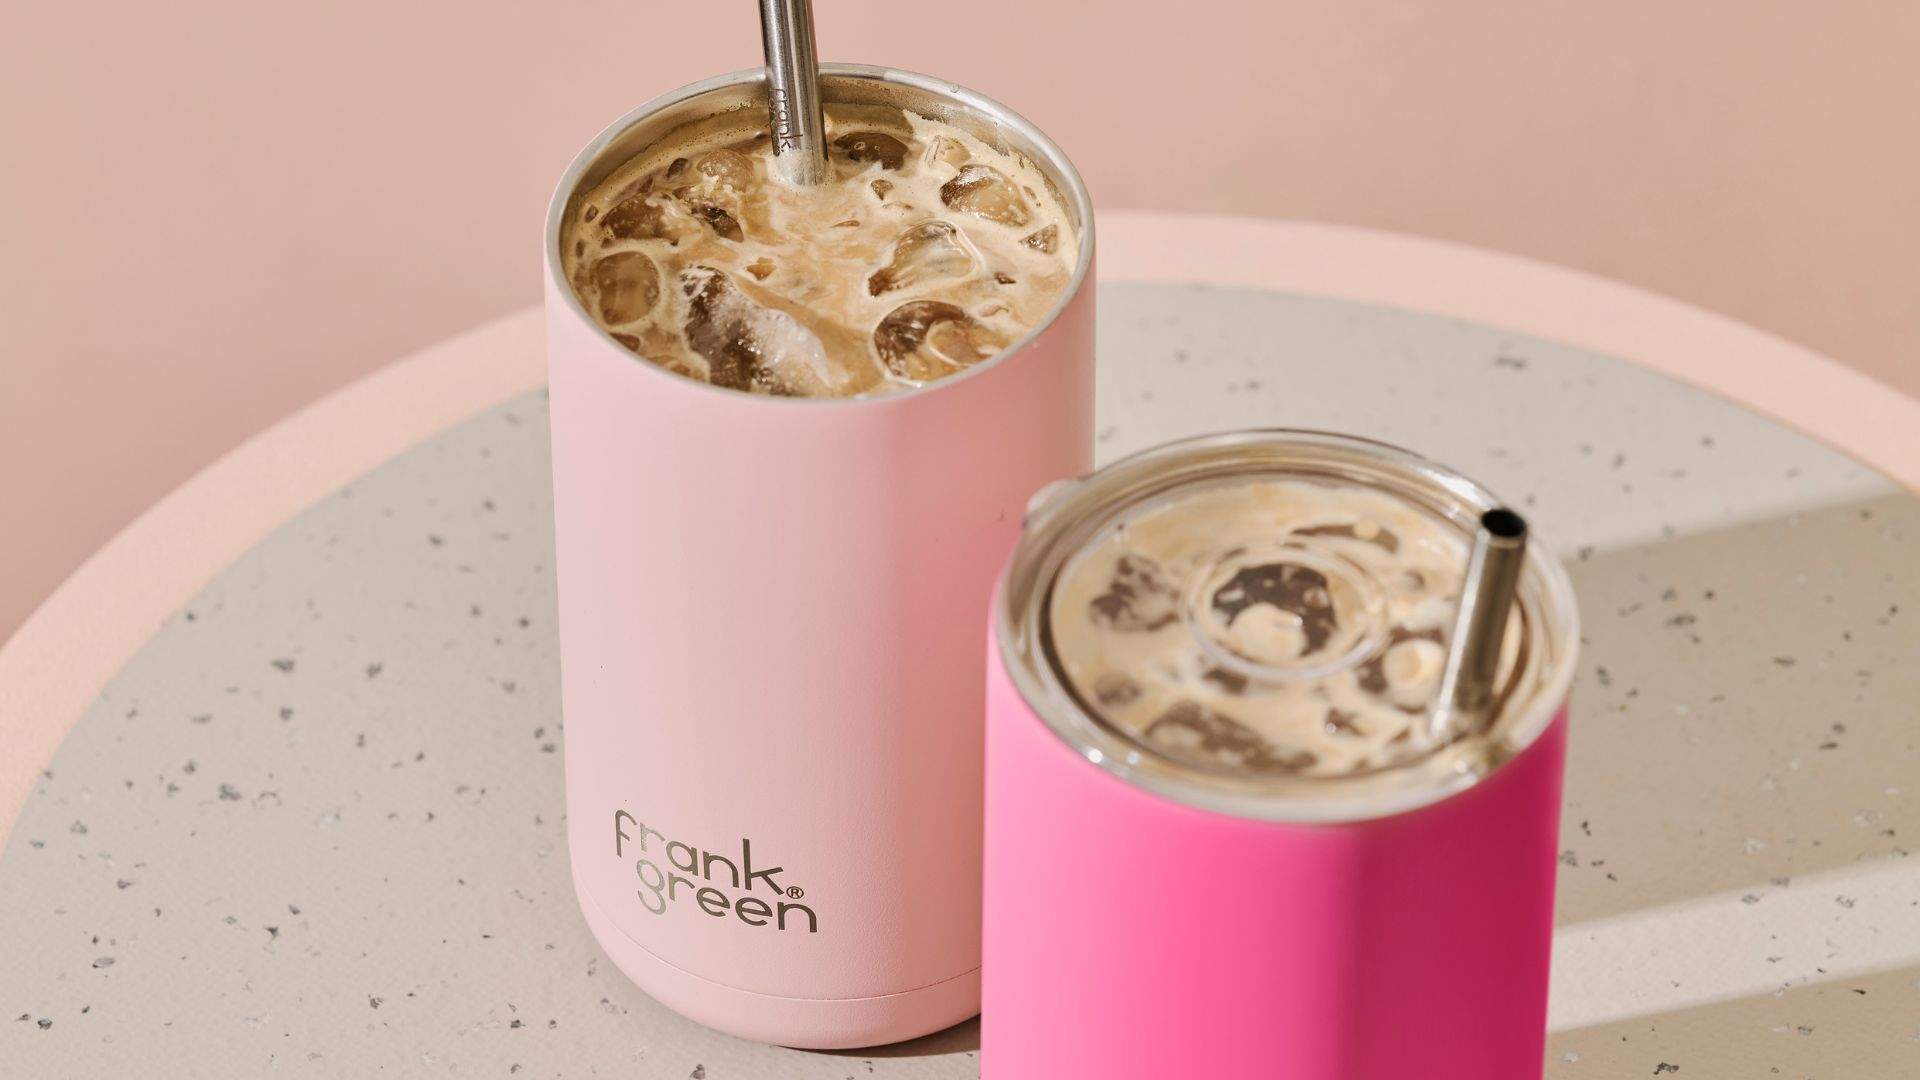 Free Frank Green Iced Coffee Cups at Industry Beans 